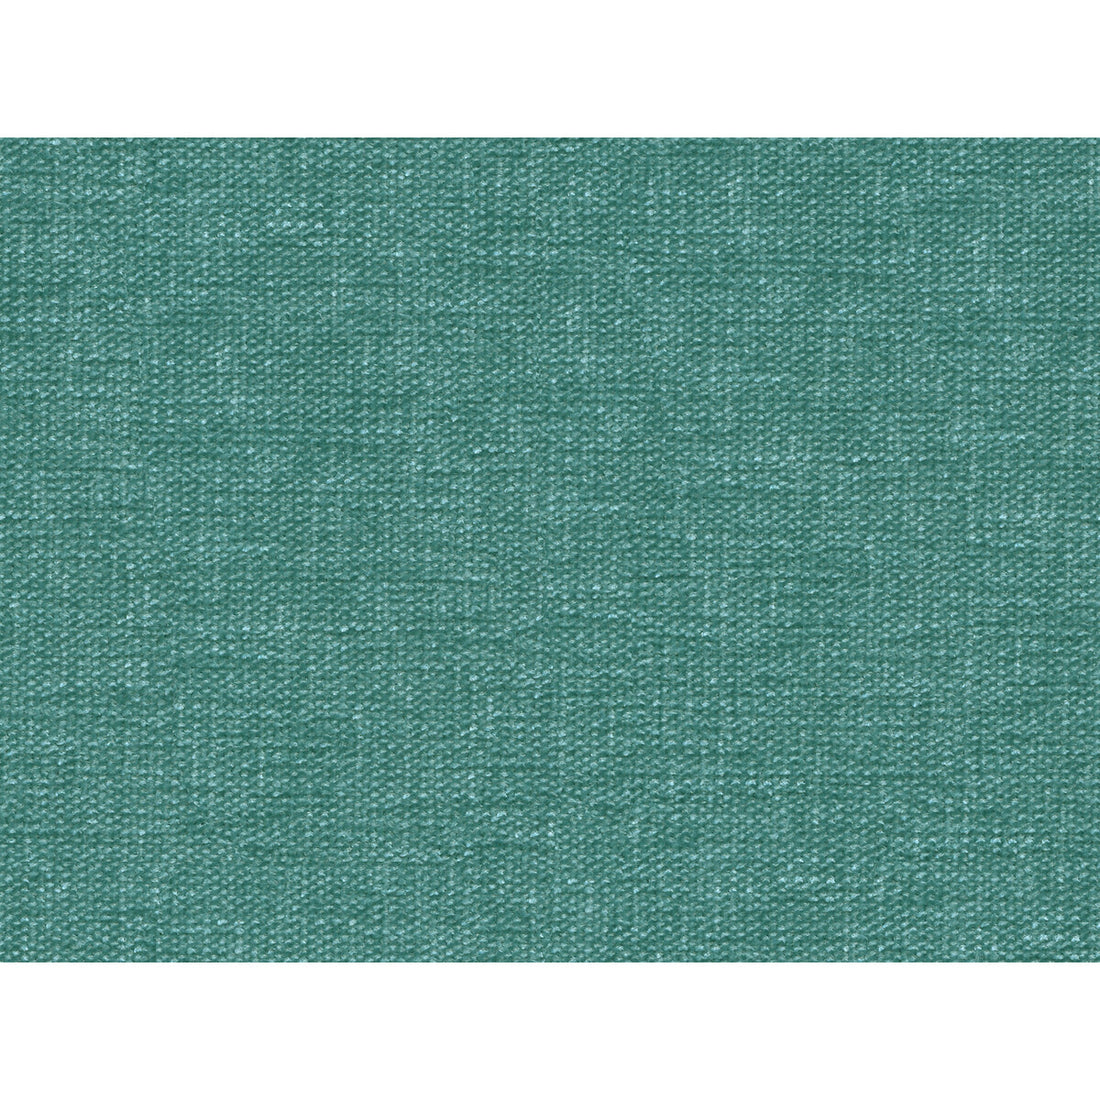 Kravet Contract fabric in 34961-313 color - pattern 34961.313.0 - by Kravet Contract in the Performance Kravetarmor collection